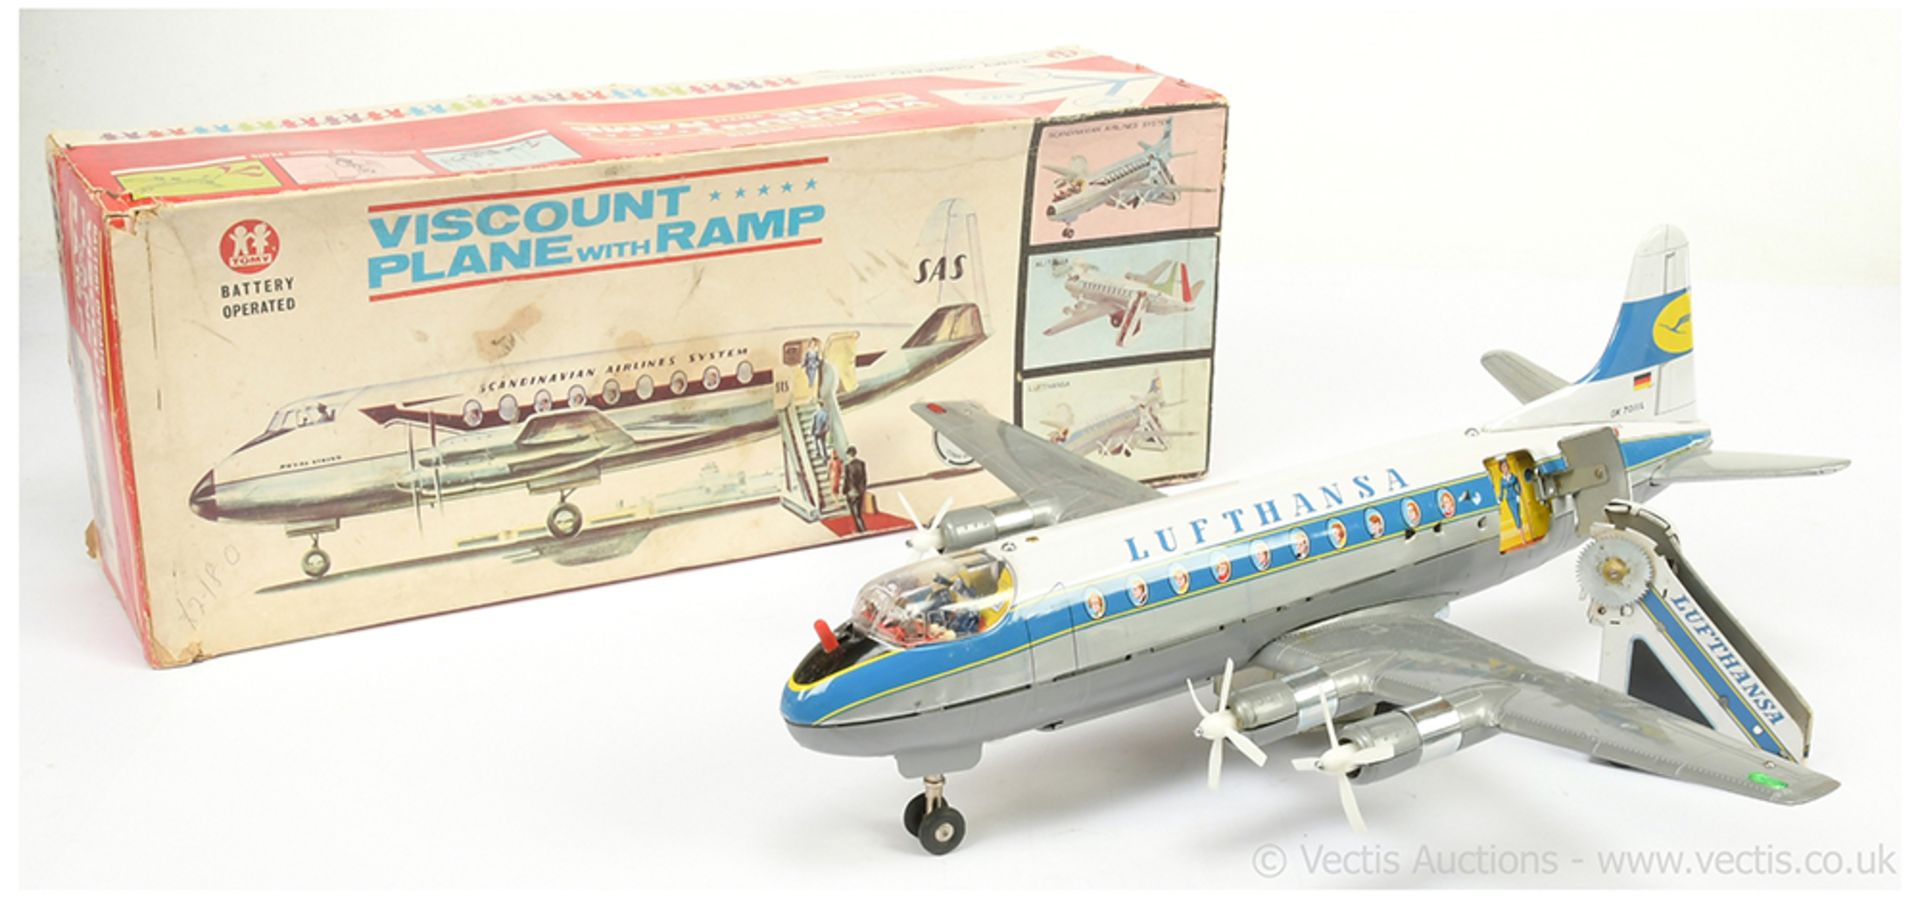 Tomy (Japan) tinplate "Battery Operated Viscount 